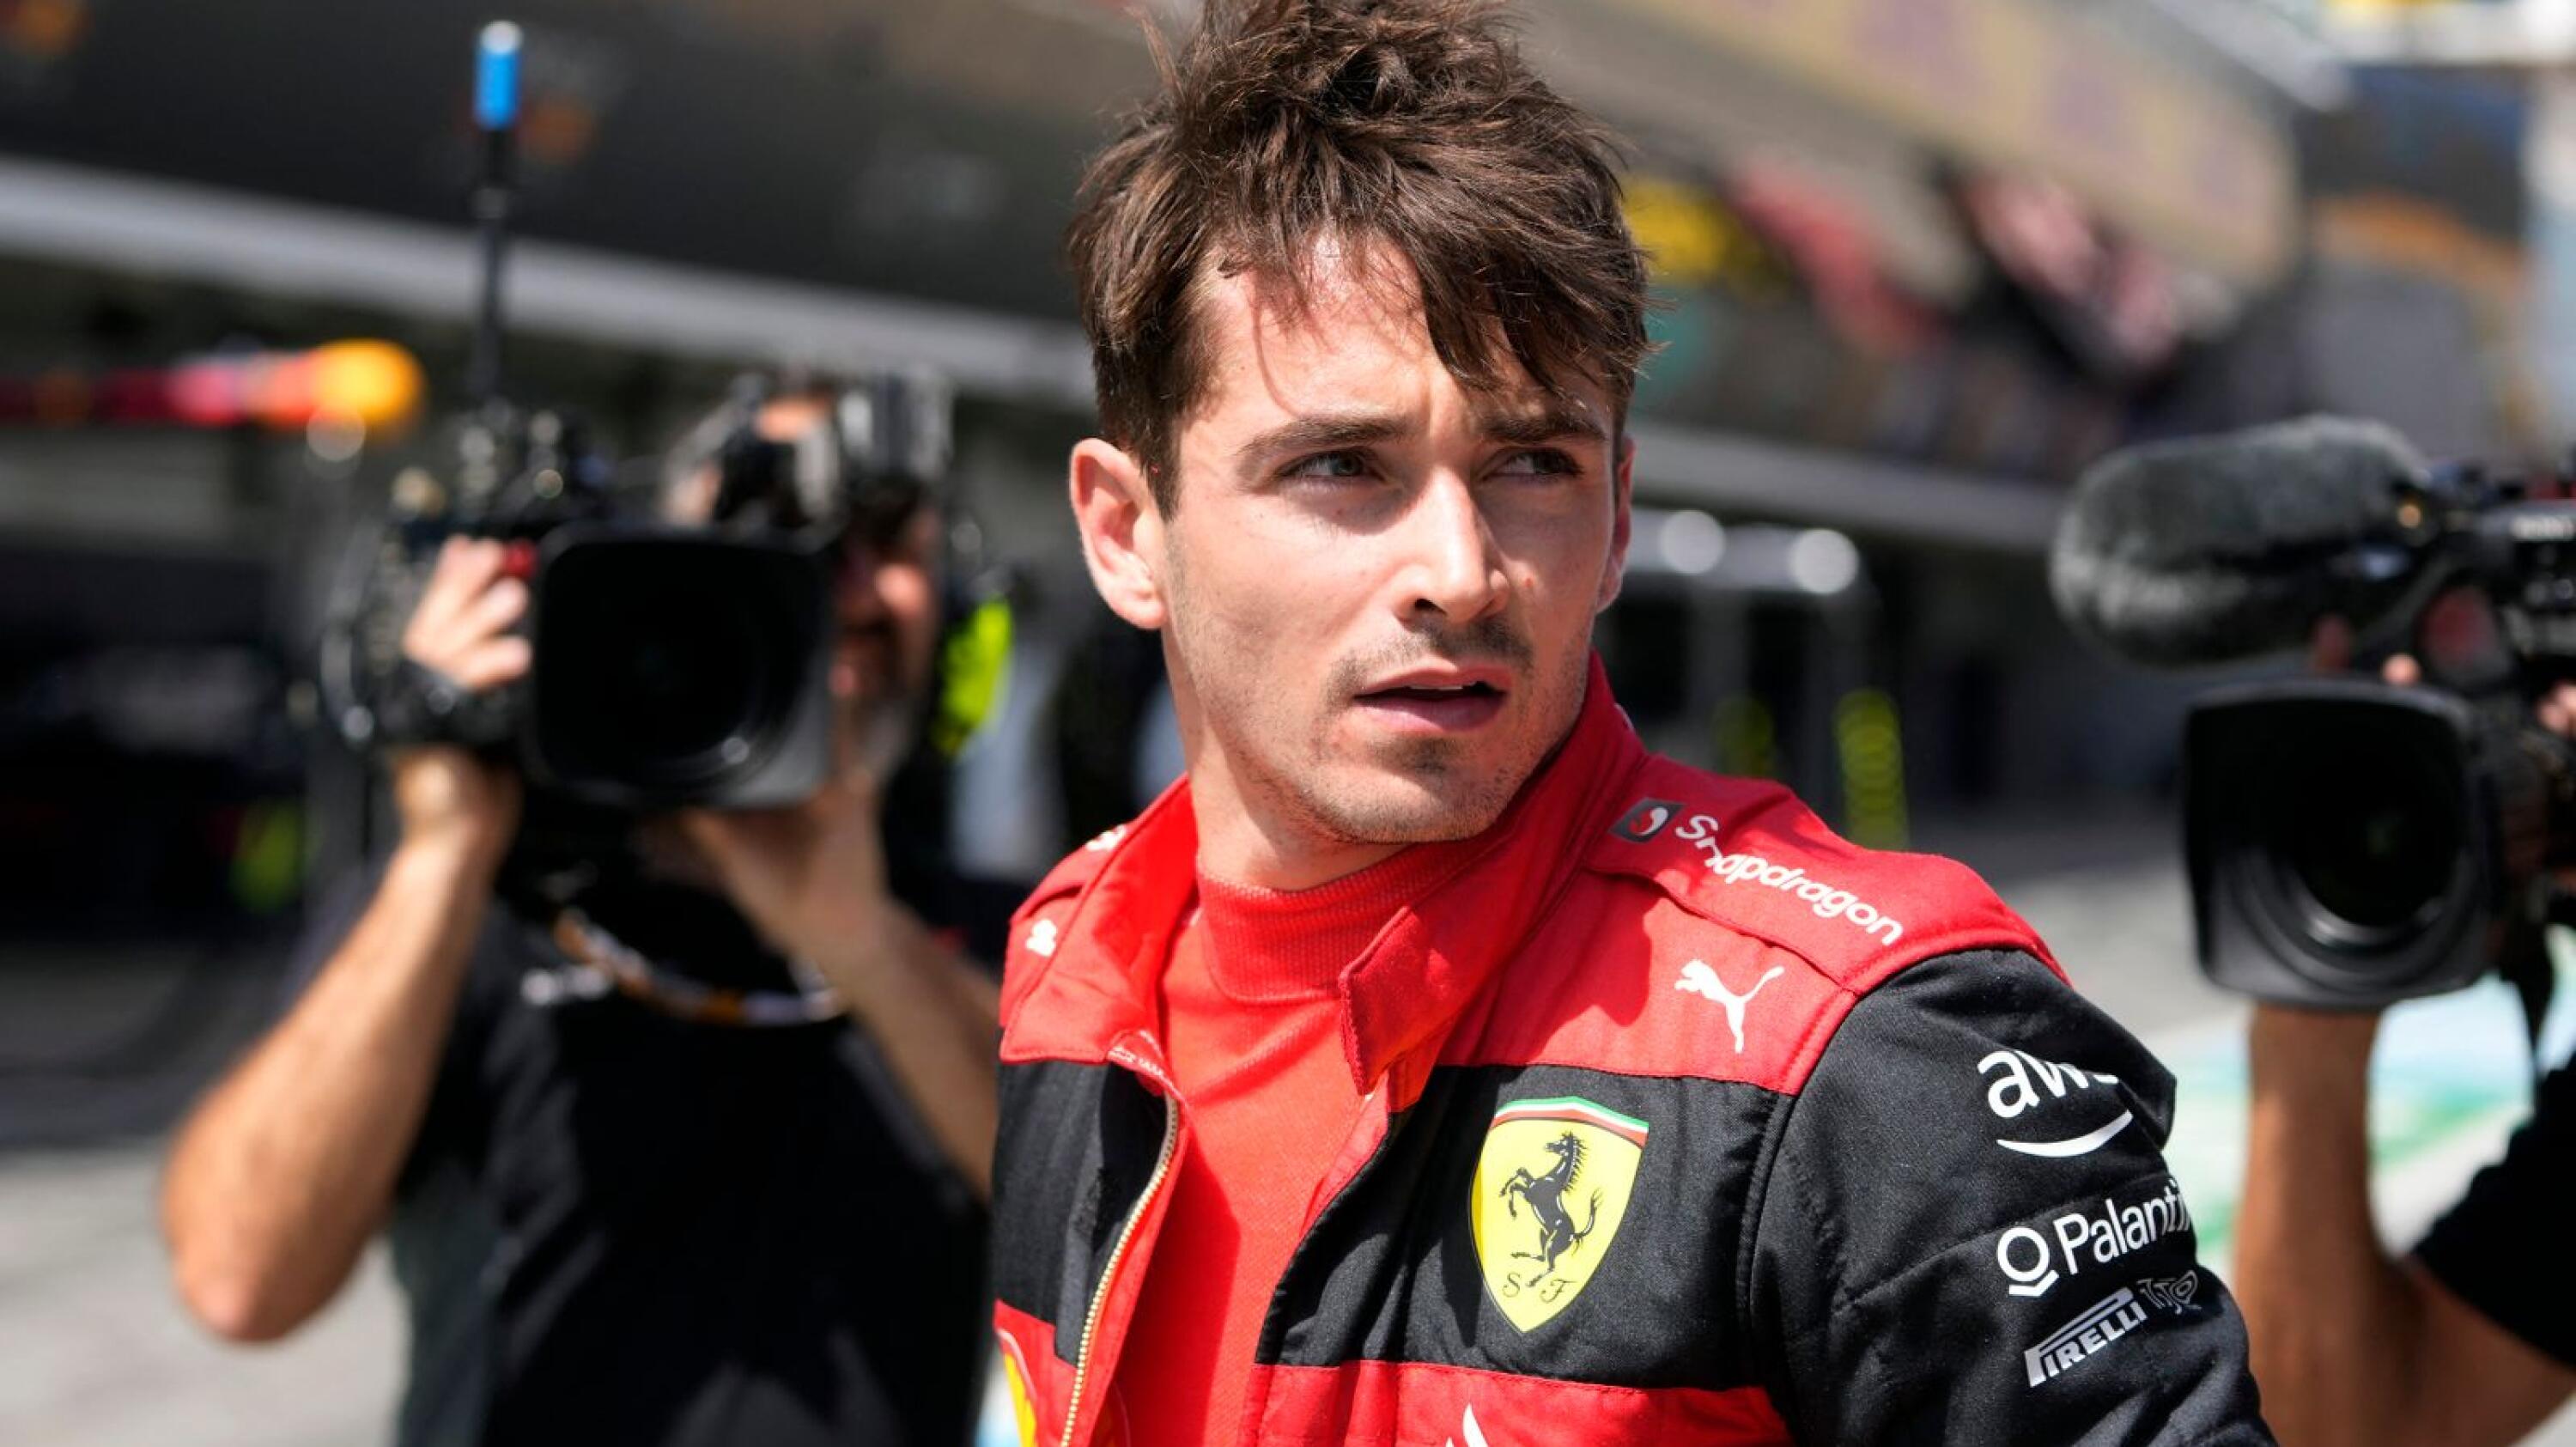 Ferrari's Monegasque driver Charles Leclerc reacts at the pitlane after his car's breakdown during the Spanish Formula One Grand Prix